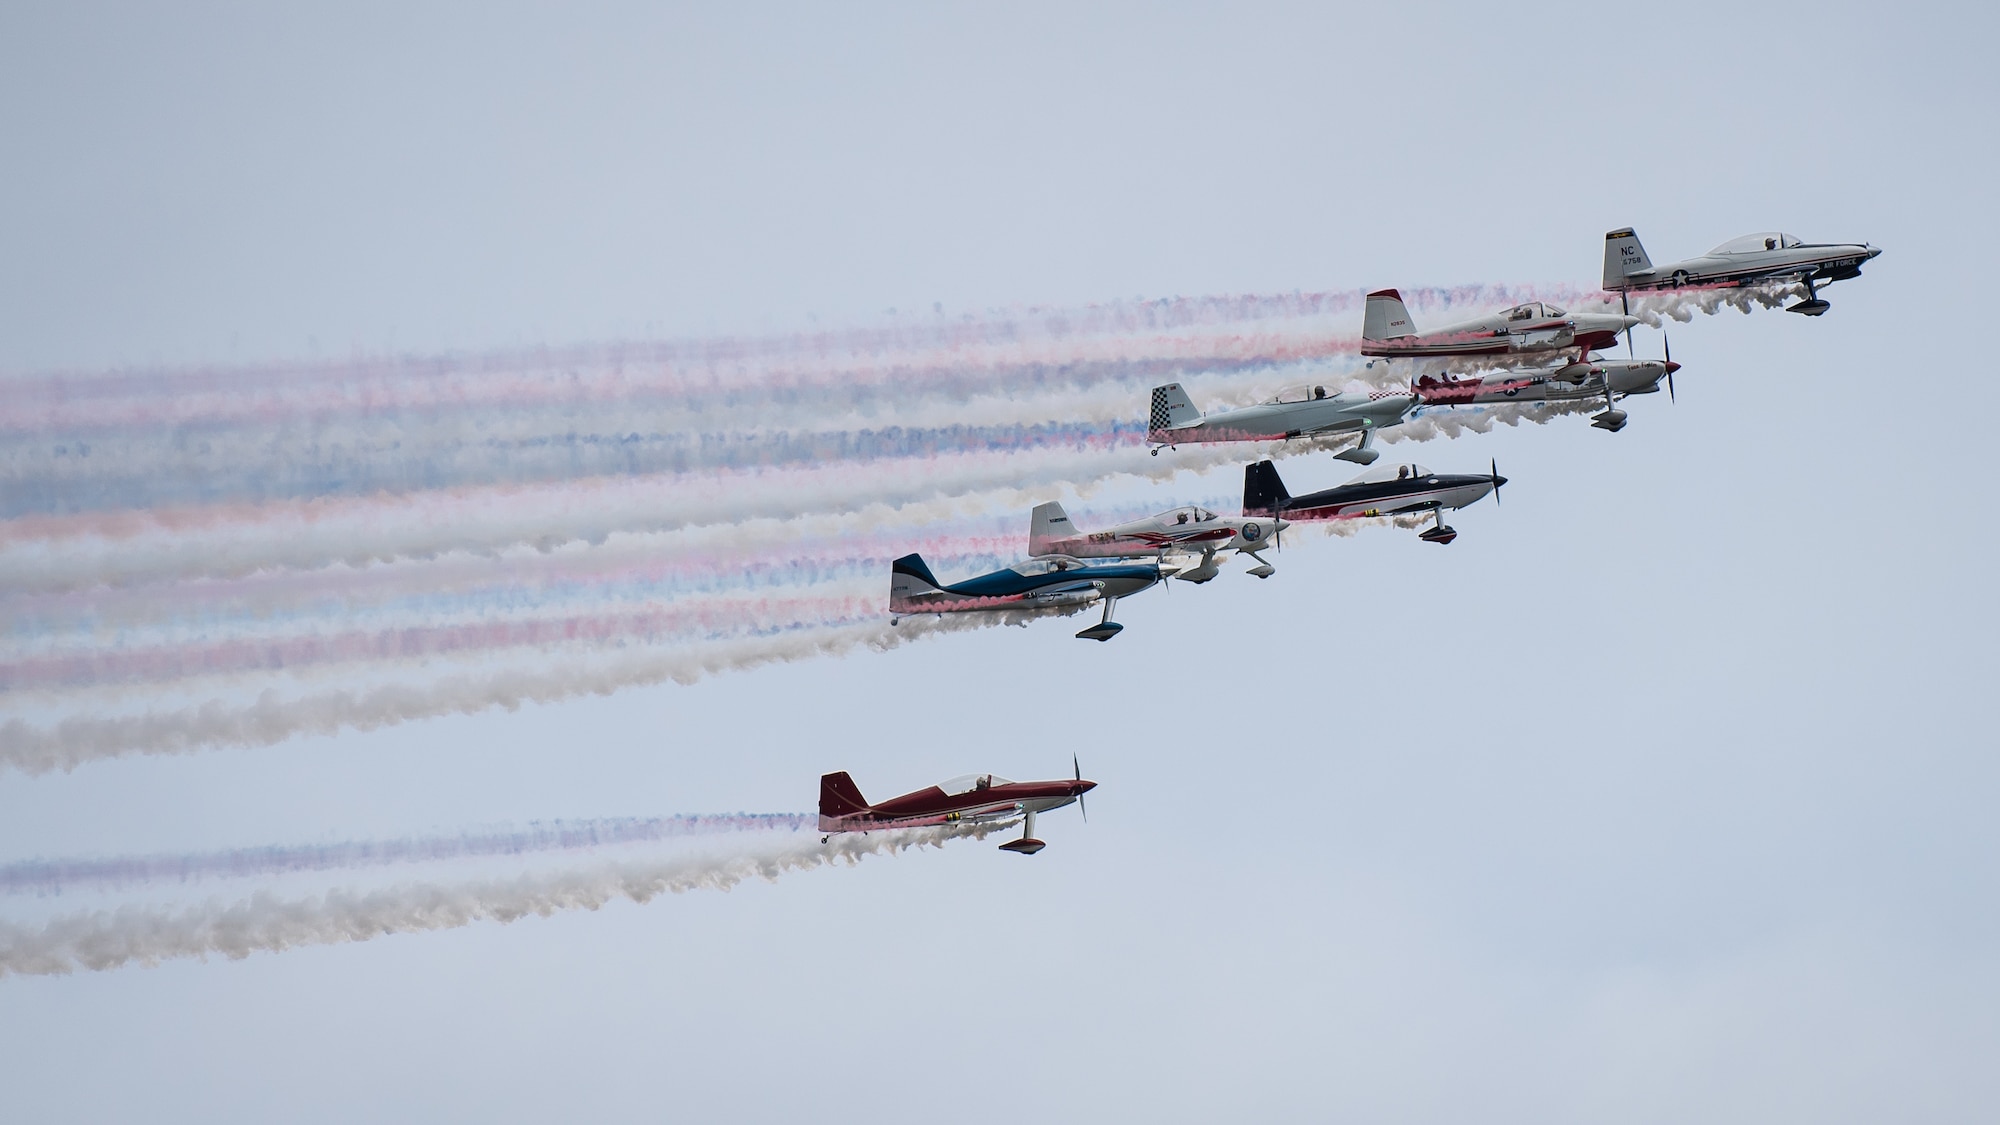 RV-4 pilots with the KC Flight Team perform an aerial demonstration during the Thunder Over Louisville airshow in Louisville, Ky., April 13, 2019. The Kentucky Air National Guard once again served as the base of operations for military aircraft participating in the annual event, which has grown to become one of the largest single-day air shows in North America. (U.S. Air National Guard photo by Dale Greer)